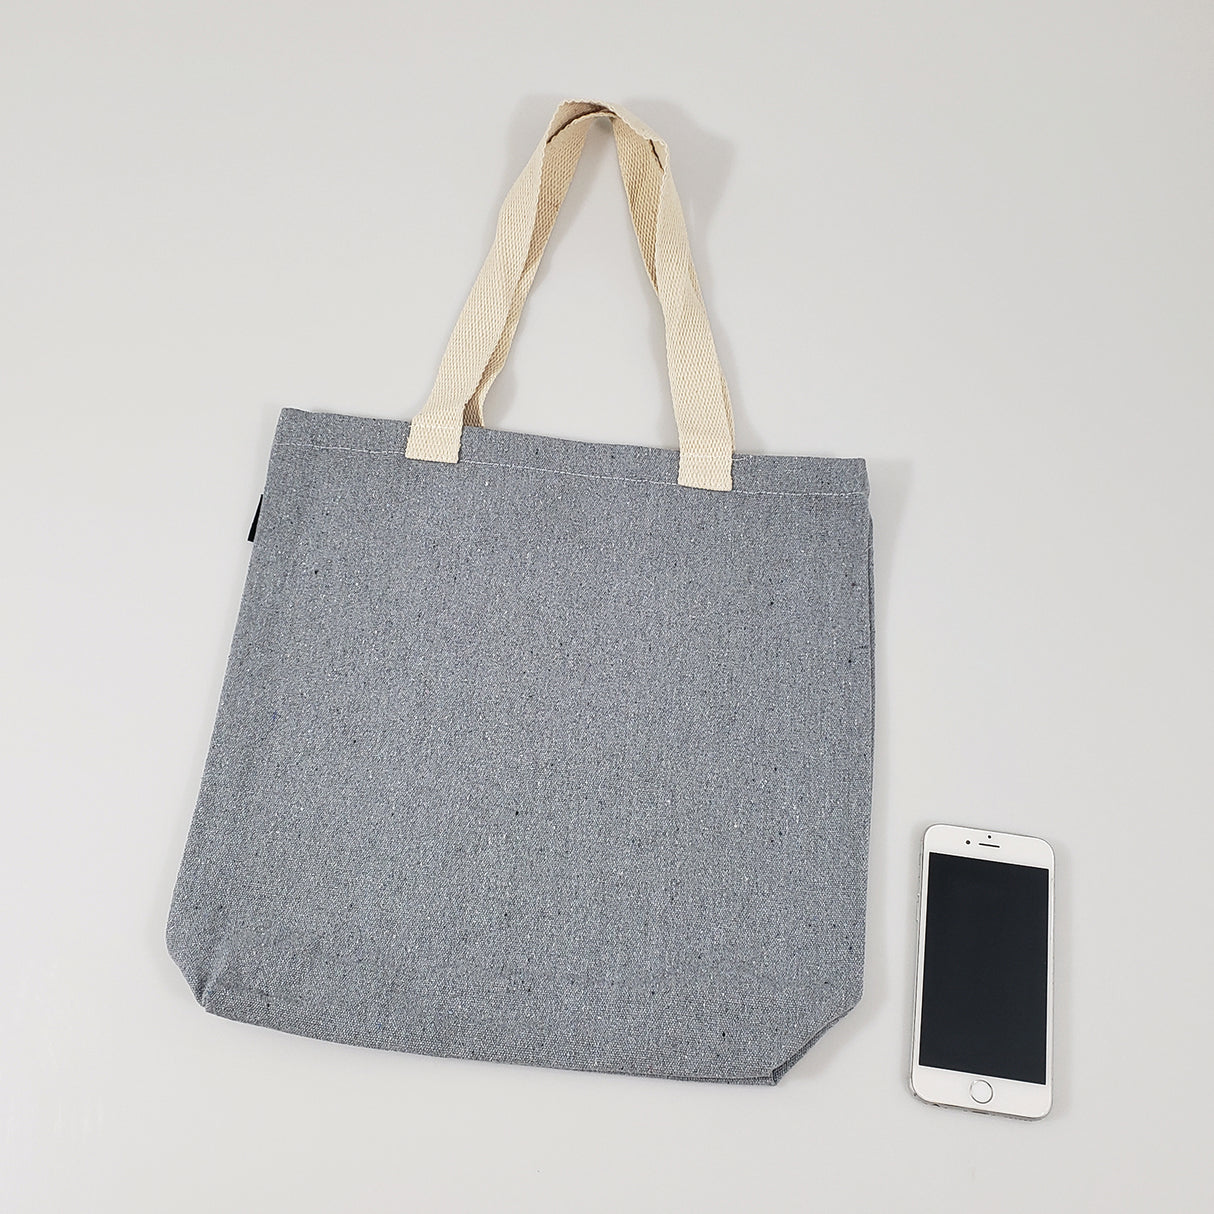 90 ct Recycled Canvas Tote Bag With Bottom Gusset - By Case